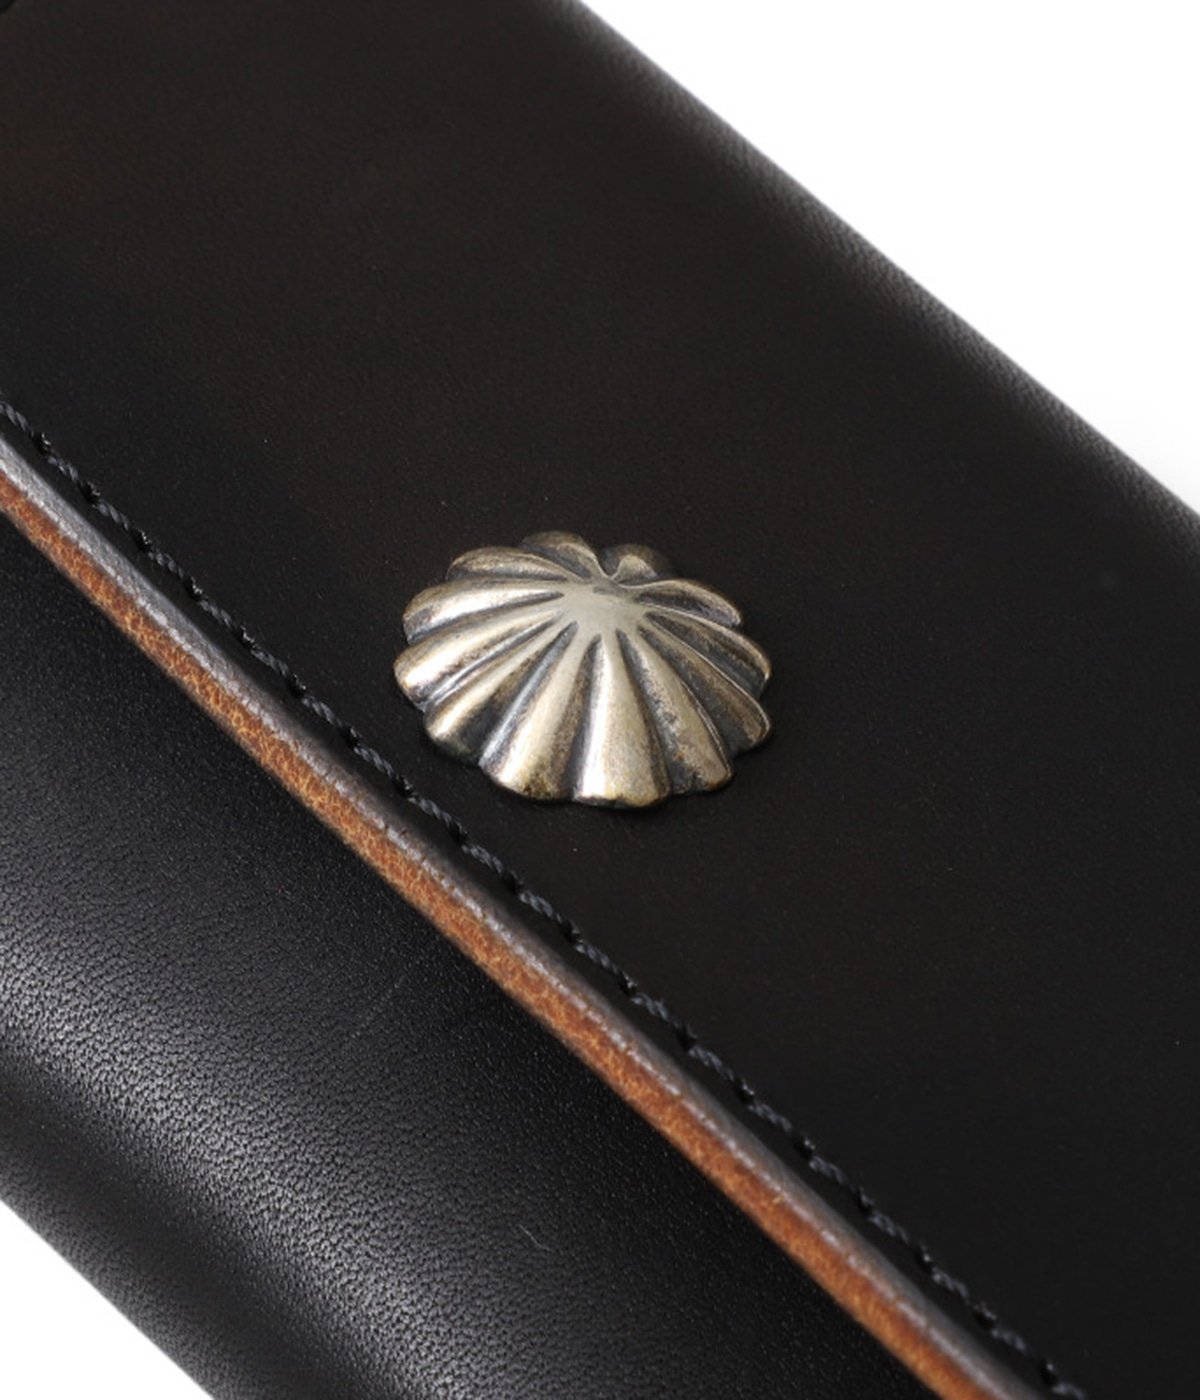 CLASSIC CARD CASE No.1 -SHELL- | LARRY SMITH(ラリースミス 